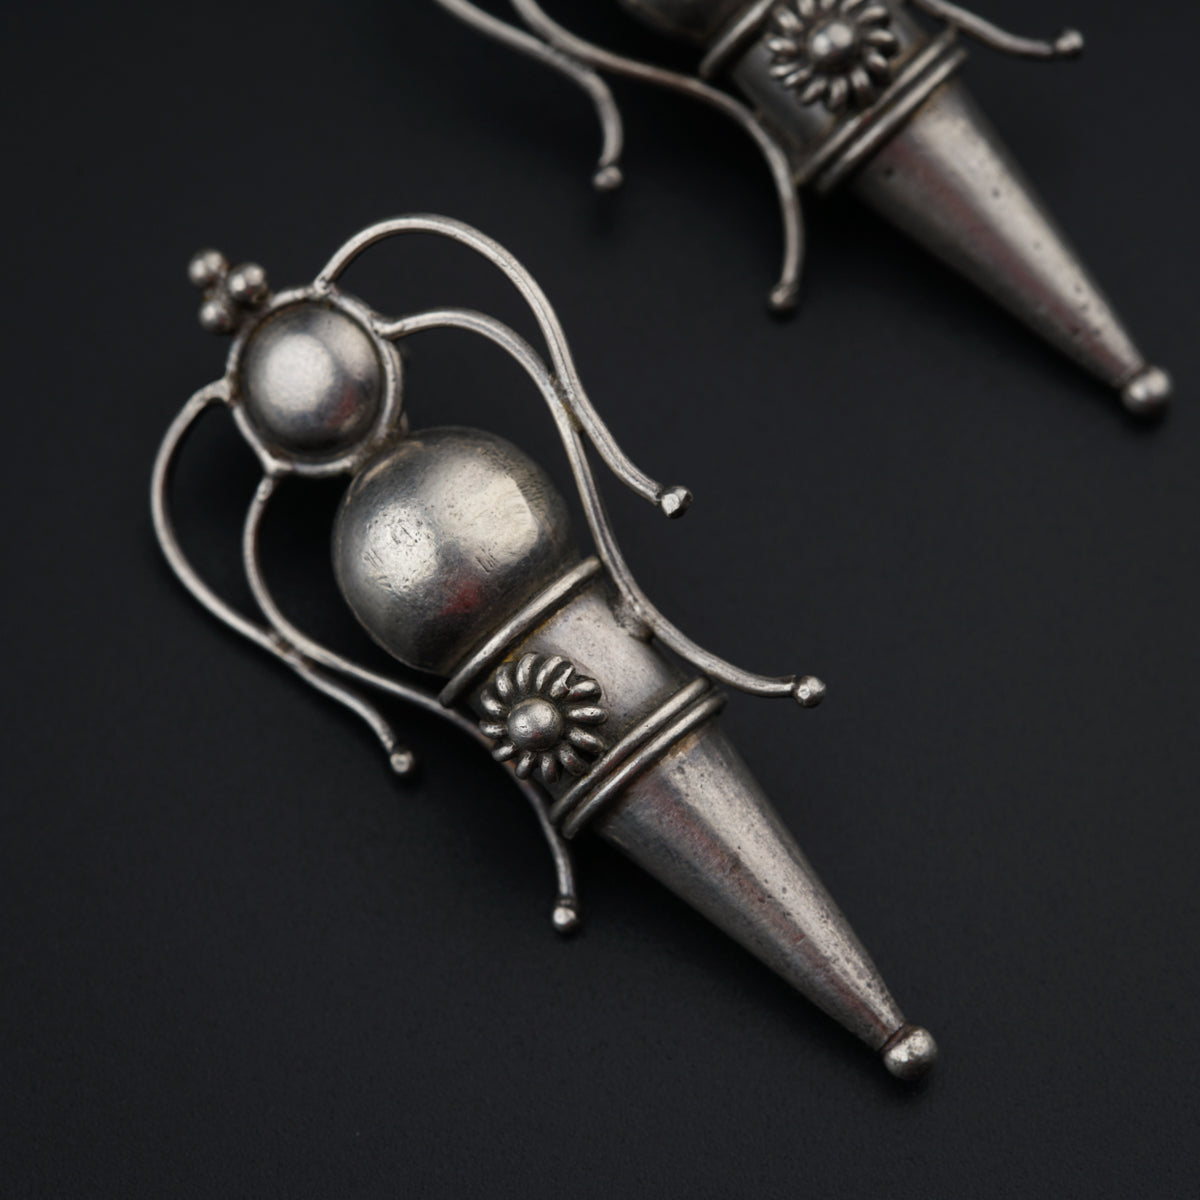 a pair of silver colored objects on a black surface